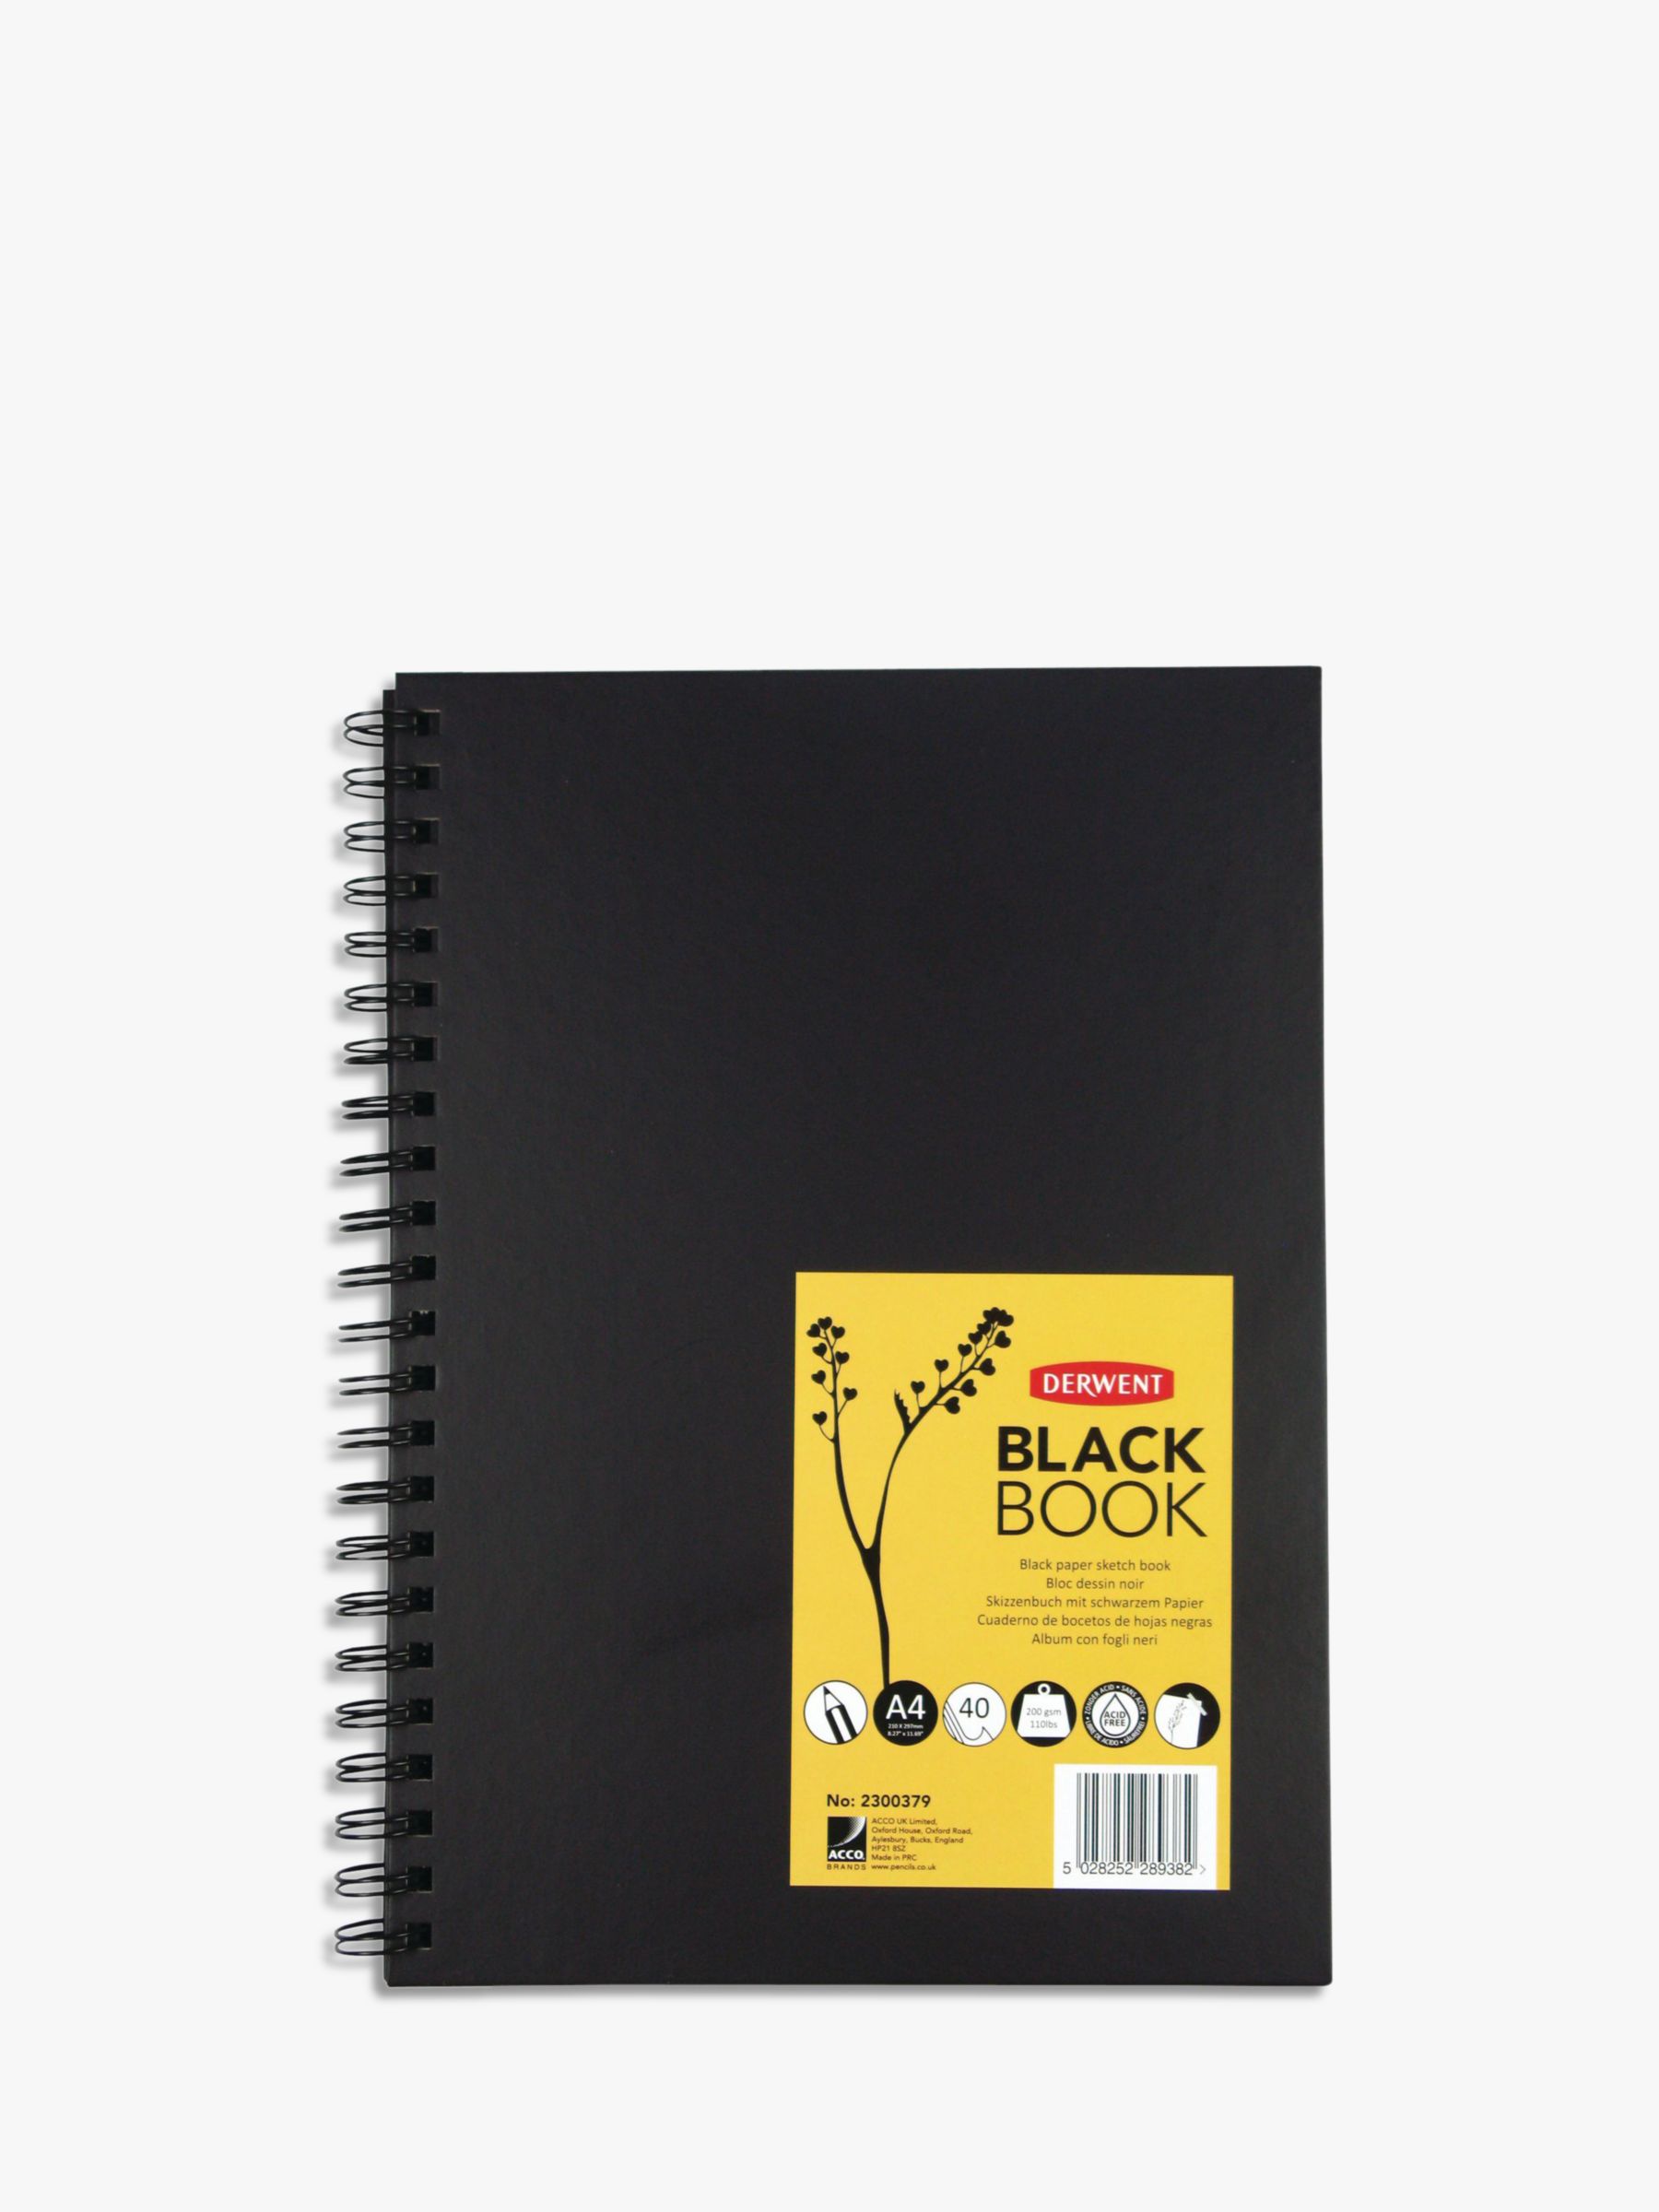 My Big Sketch Book 200 Pages: 200 Blank drawing pad for children, teens and  adults |Kids sketchbook | 200 pages Sketchbook | Practice How to Draw